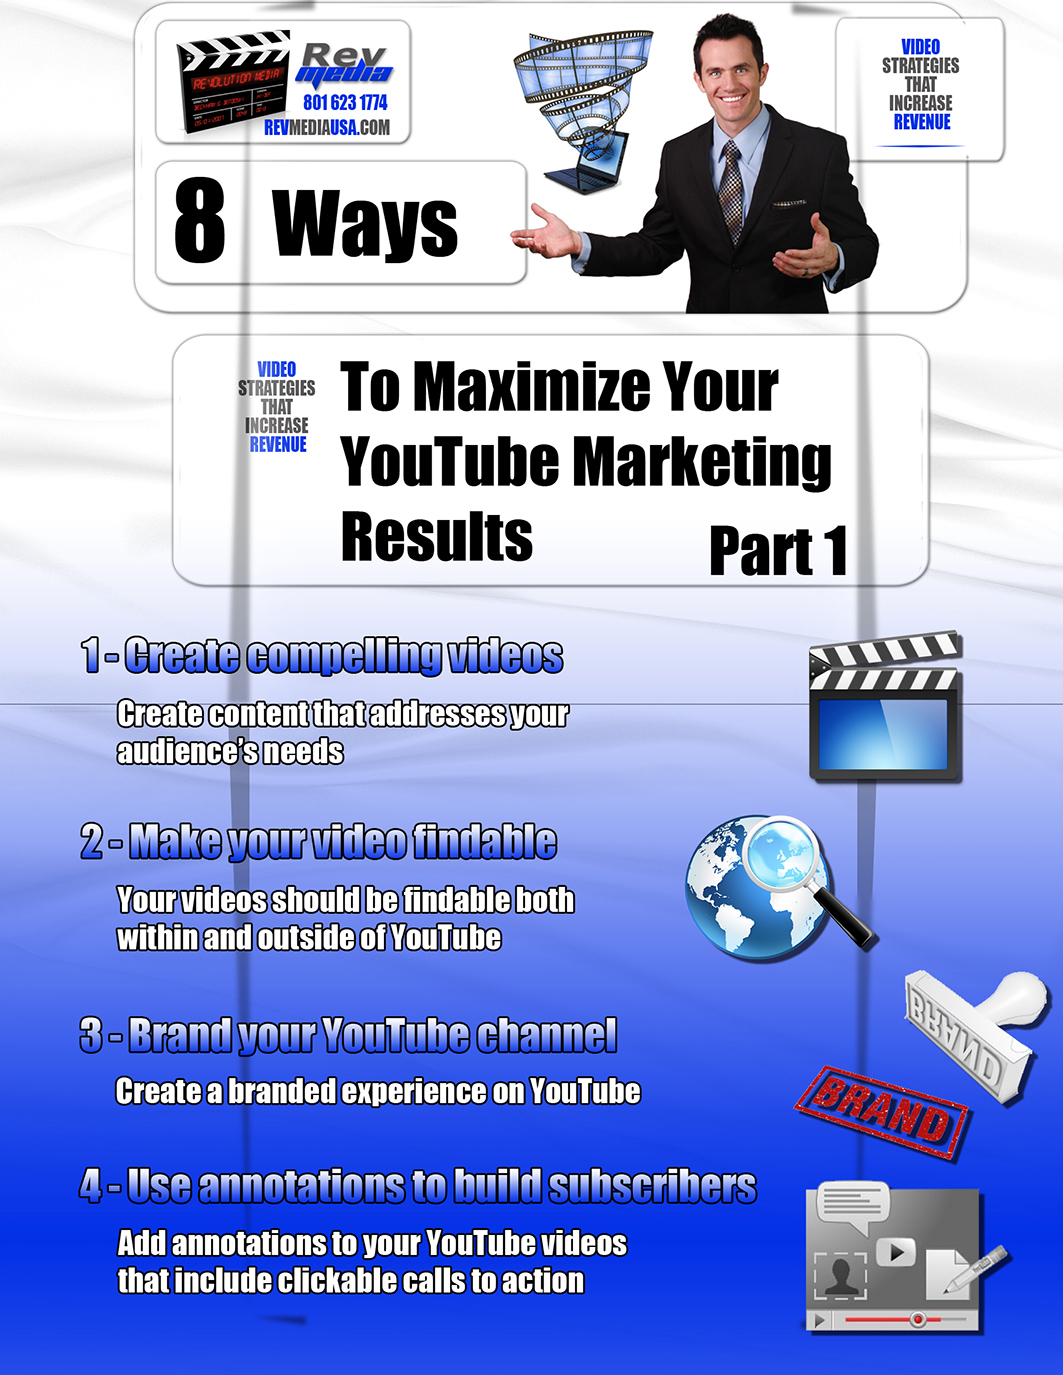 https://revmediausa.com/alternate-home-page/  8 Ways to Maximize Your YouTube Marketing Results: Part 1, Orem Utah  1 - Create compelling videos. Create content that addresses your audience’s needs. Your goal should be to create videos that are helpful, valuable and compelling to your prospects and clients. If you can blog about it, you can create a video about it. Your video content may consist of how-to’s, answers to frequently asked questions, expert interviews, screen video captures, slide shows and more. 2 - Make your video findable. Your videos should be findable both within and outside of YouTube. Videos often appear on the first page of search engines, and are a proven method of leap-frogging your competition to the top of the search results page. The fact that Google owns YouTube can’t be overlooked. To make your video more findable, you’ll want to focus on titles, descriptions, and tags. Make sure your targeted keywords are in the first few words of your title, be as descriptive and keyword-rich as possible, and be sure to include any and all related keywords in the tags field. 3 - Brand your YouTube channel. Create a branded experience on YouTube. Consider your YouTube channel your “home away from home” by turning your channel into a destination. Create a custom background and choose your colors to match your branding. Choose “Player View” as your layout, and make sure your featured video is set to autoplay. Create playlists and feature your best content in the right column. 4 - Use annotations to build subscribers. You can add annotations to your YouTube videos that include clickable calls to action. These annotations appear on top of your videos for a specified length of time and can include links to other videos, playlists or channels, or include a subscribe option. This is also helpful if you have created a video with out-of-date information. Rather than deleting the video, you can create a new video. Then go back to the original video and embed a link that takes people to the updated, corrected version. Like Rev Media on Facebook revmediausa.com  Thanks to Rich Brooks for Information 